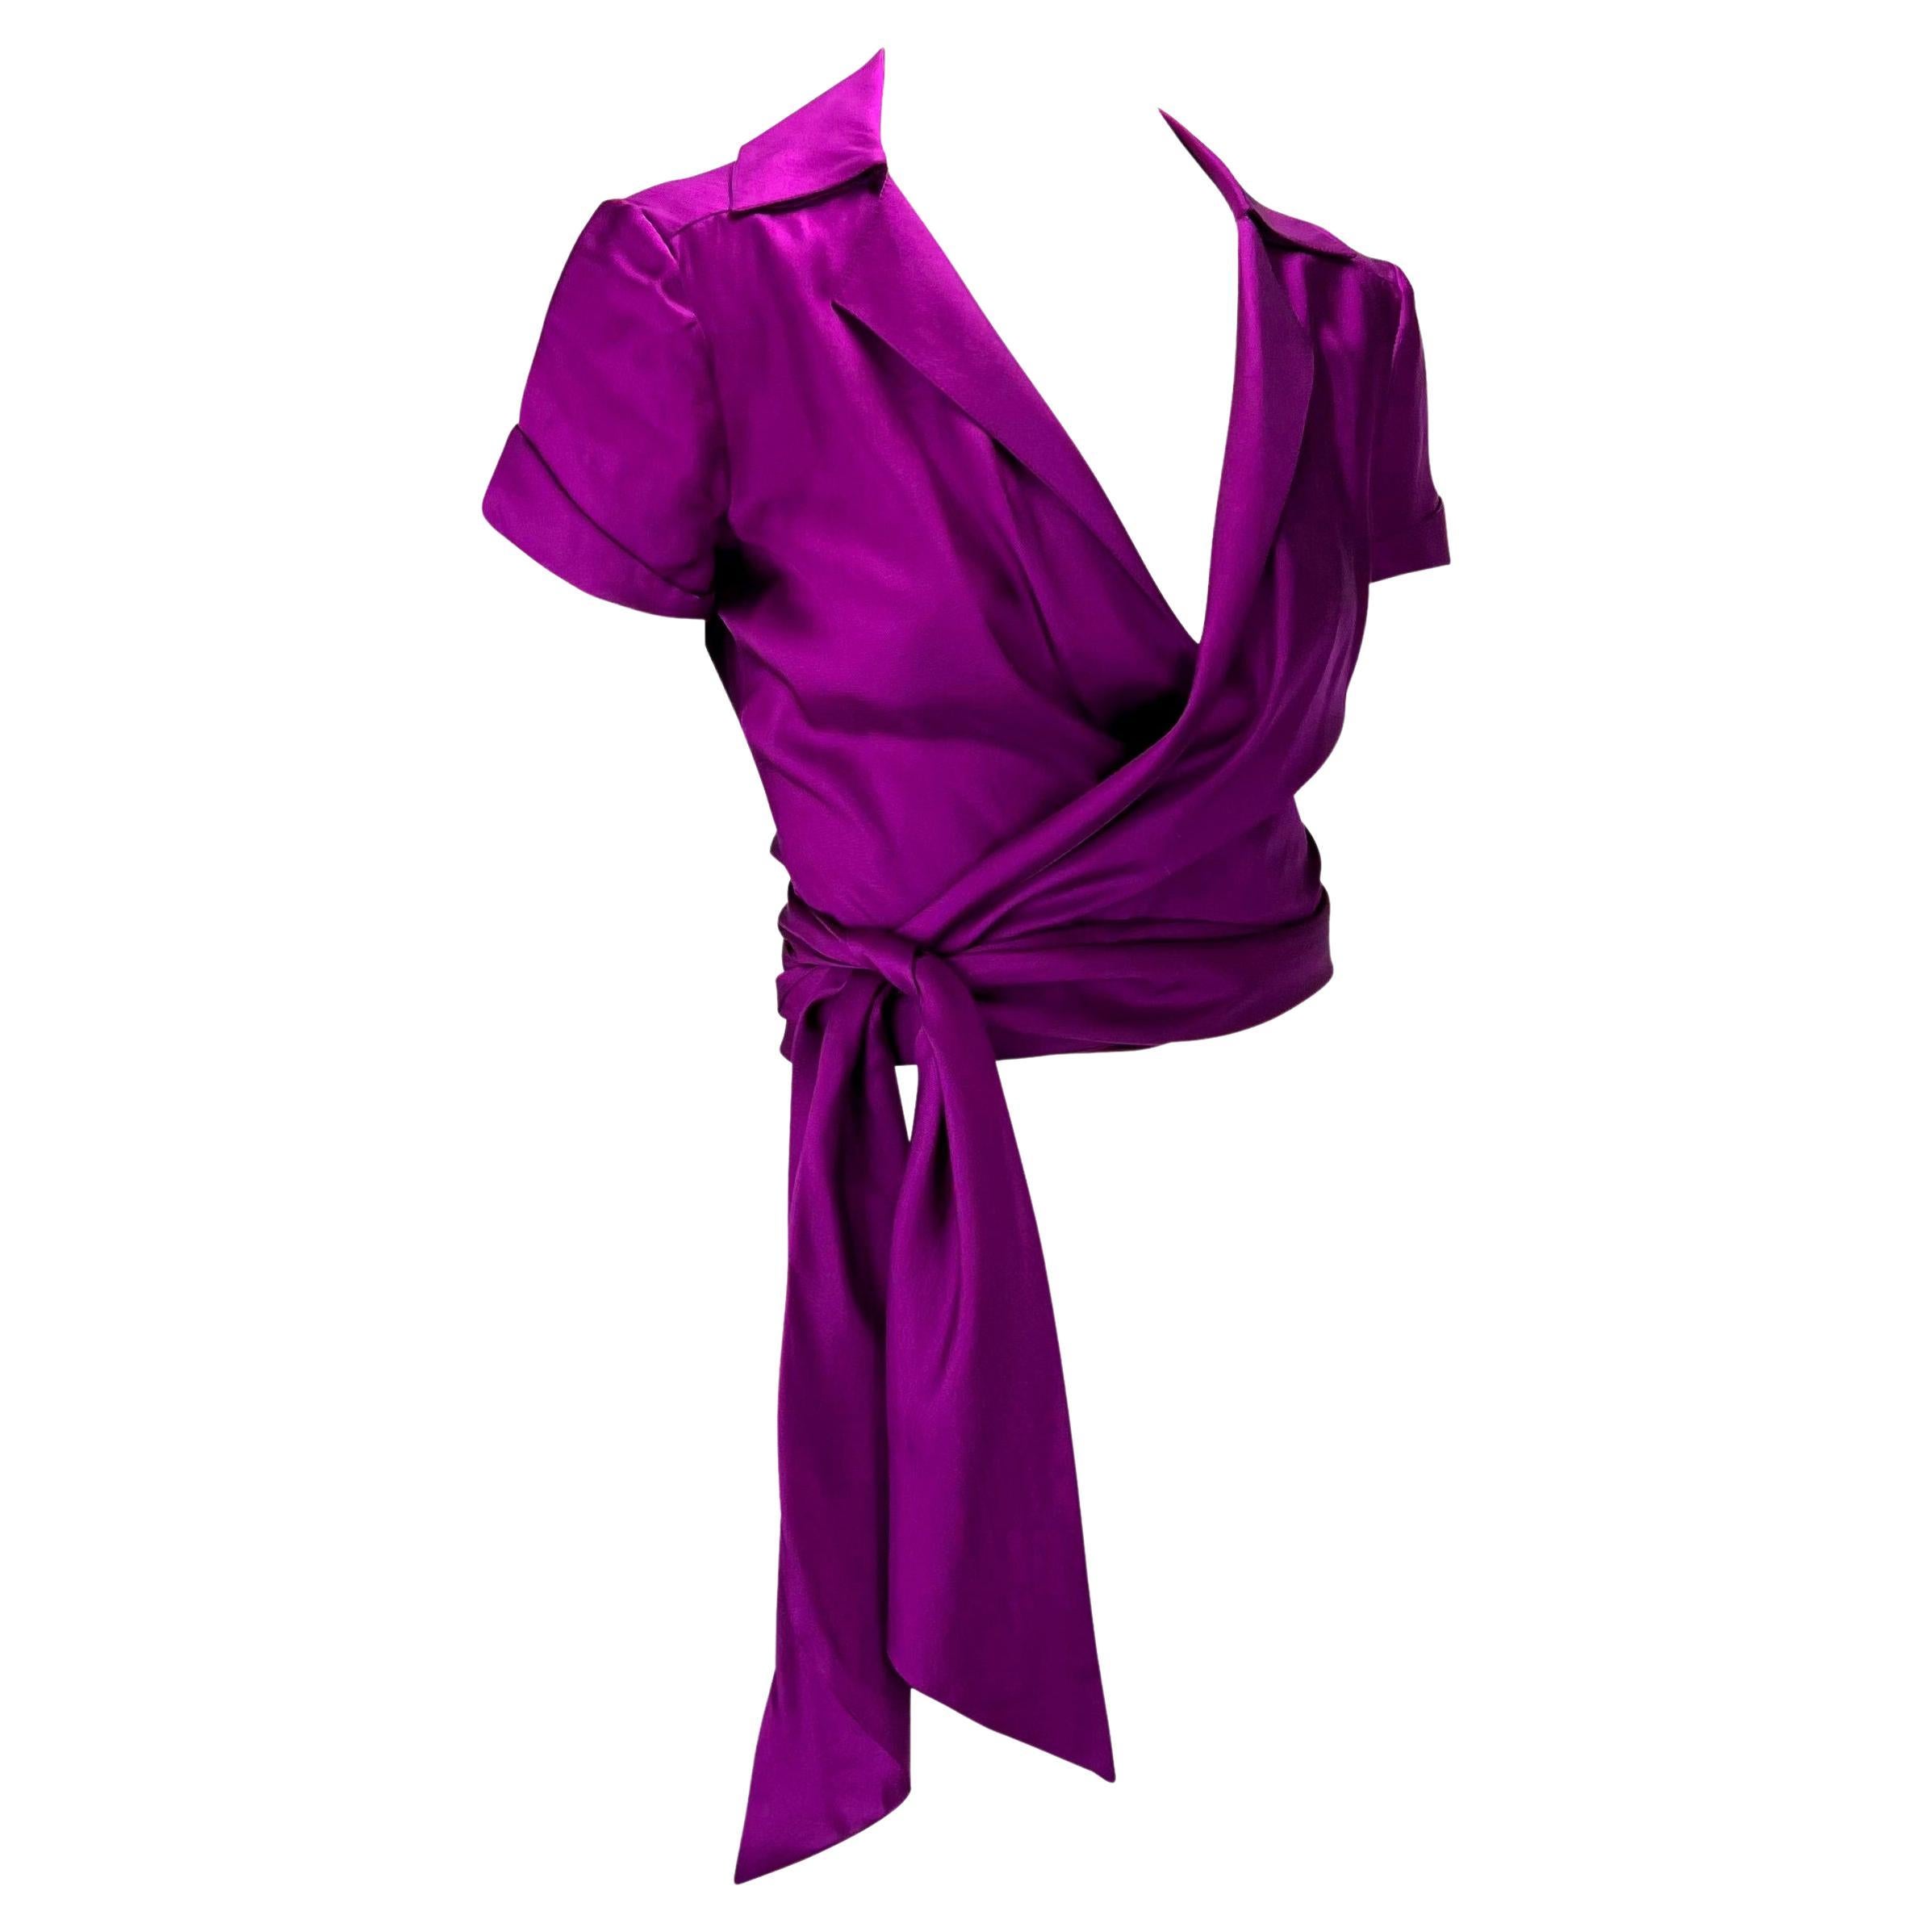 S/S 2000 Gianni Versace by Donatella Runway Purple Silk Plunge Wrap Top For Sale 2